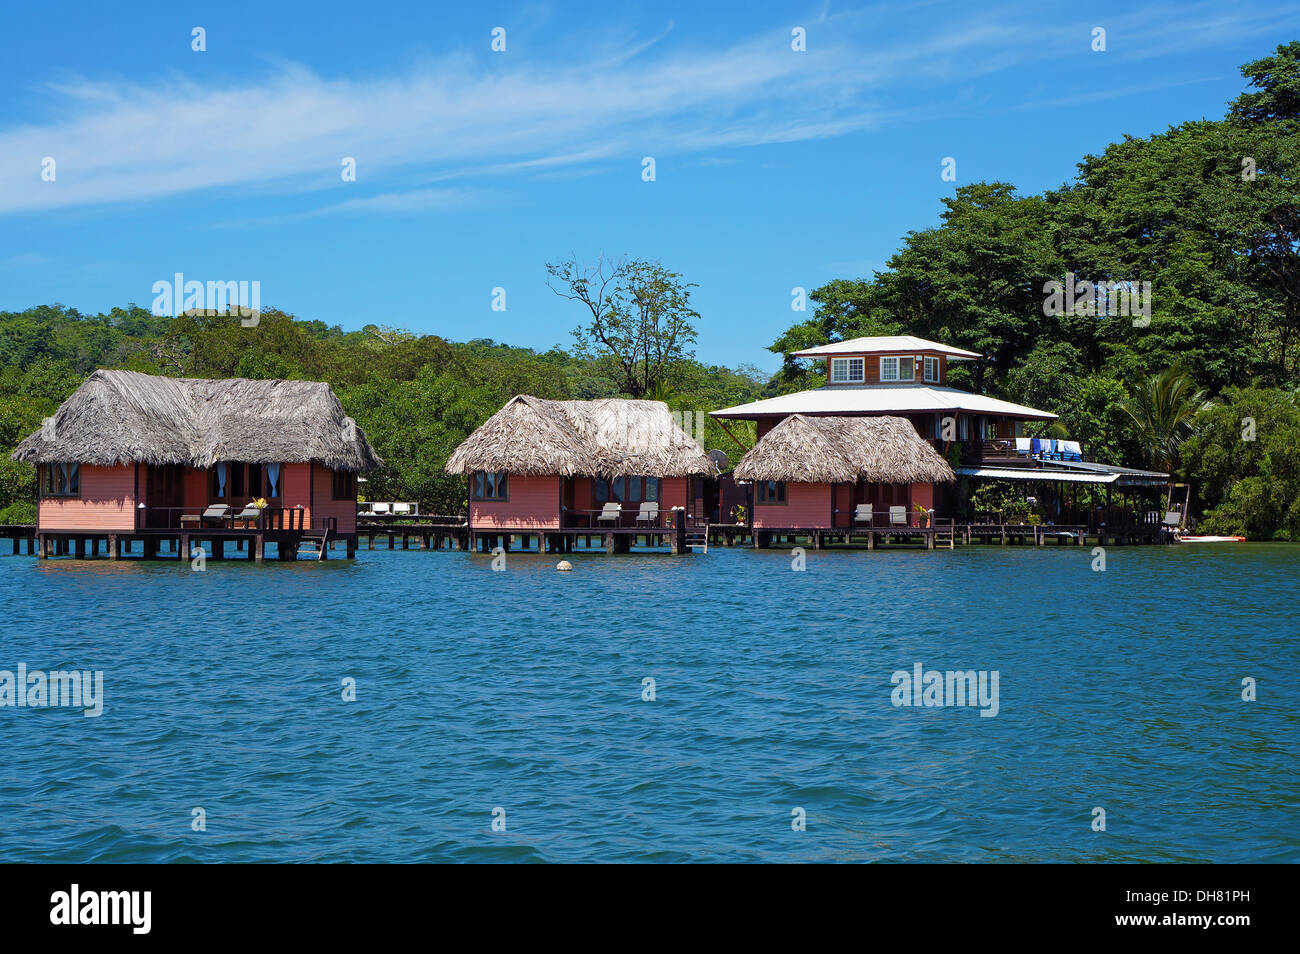 Eco resort with thatched bungalow over water, island of Bastimentos, Caribbean sea, Bocas del Toro, Panama Stock Photo